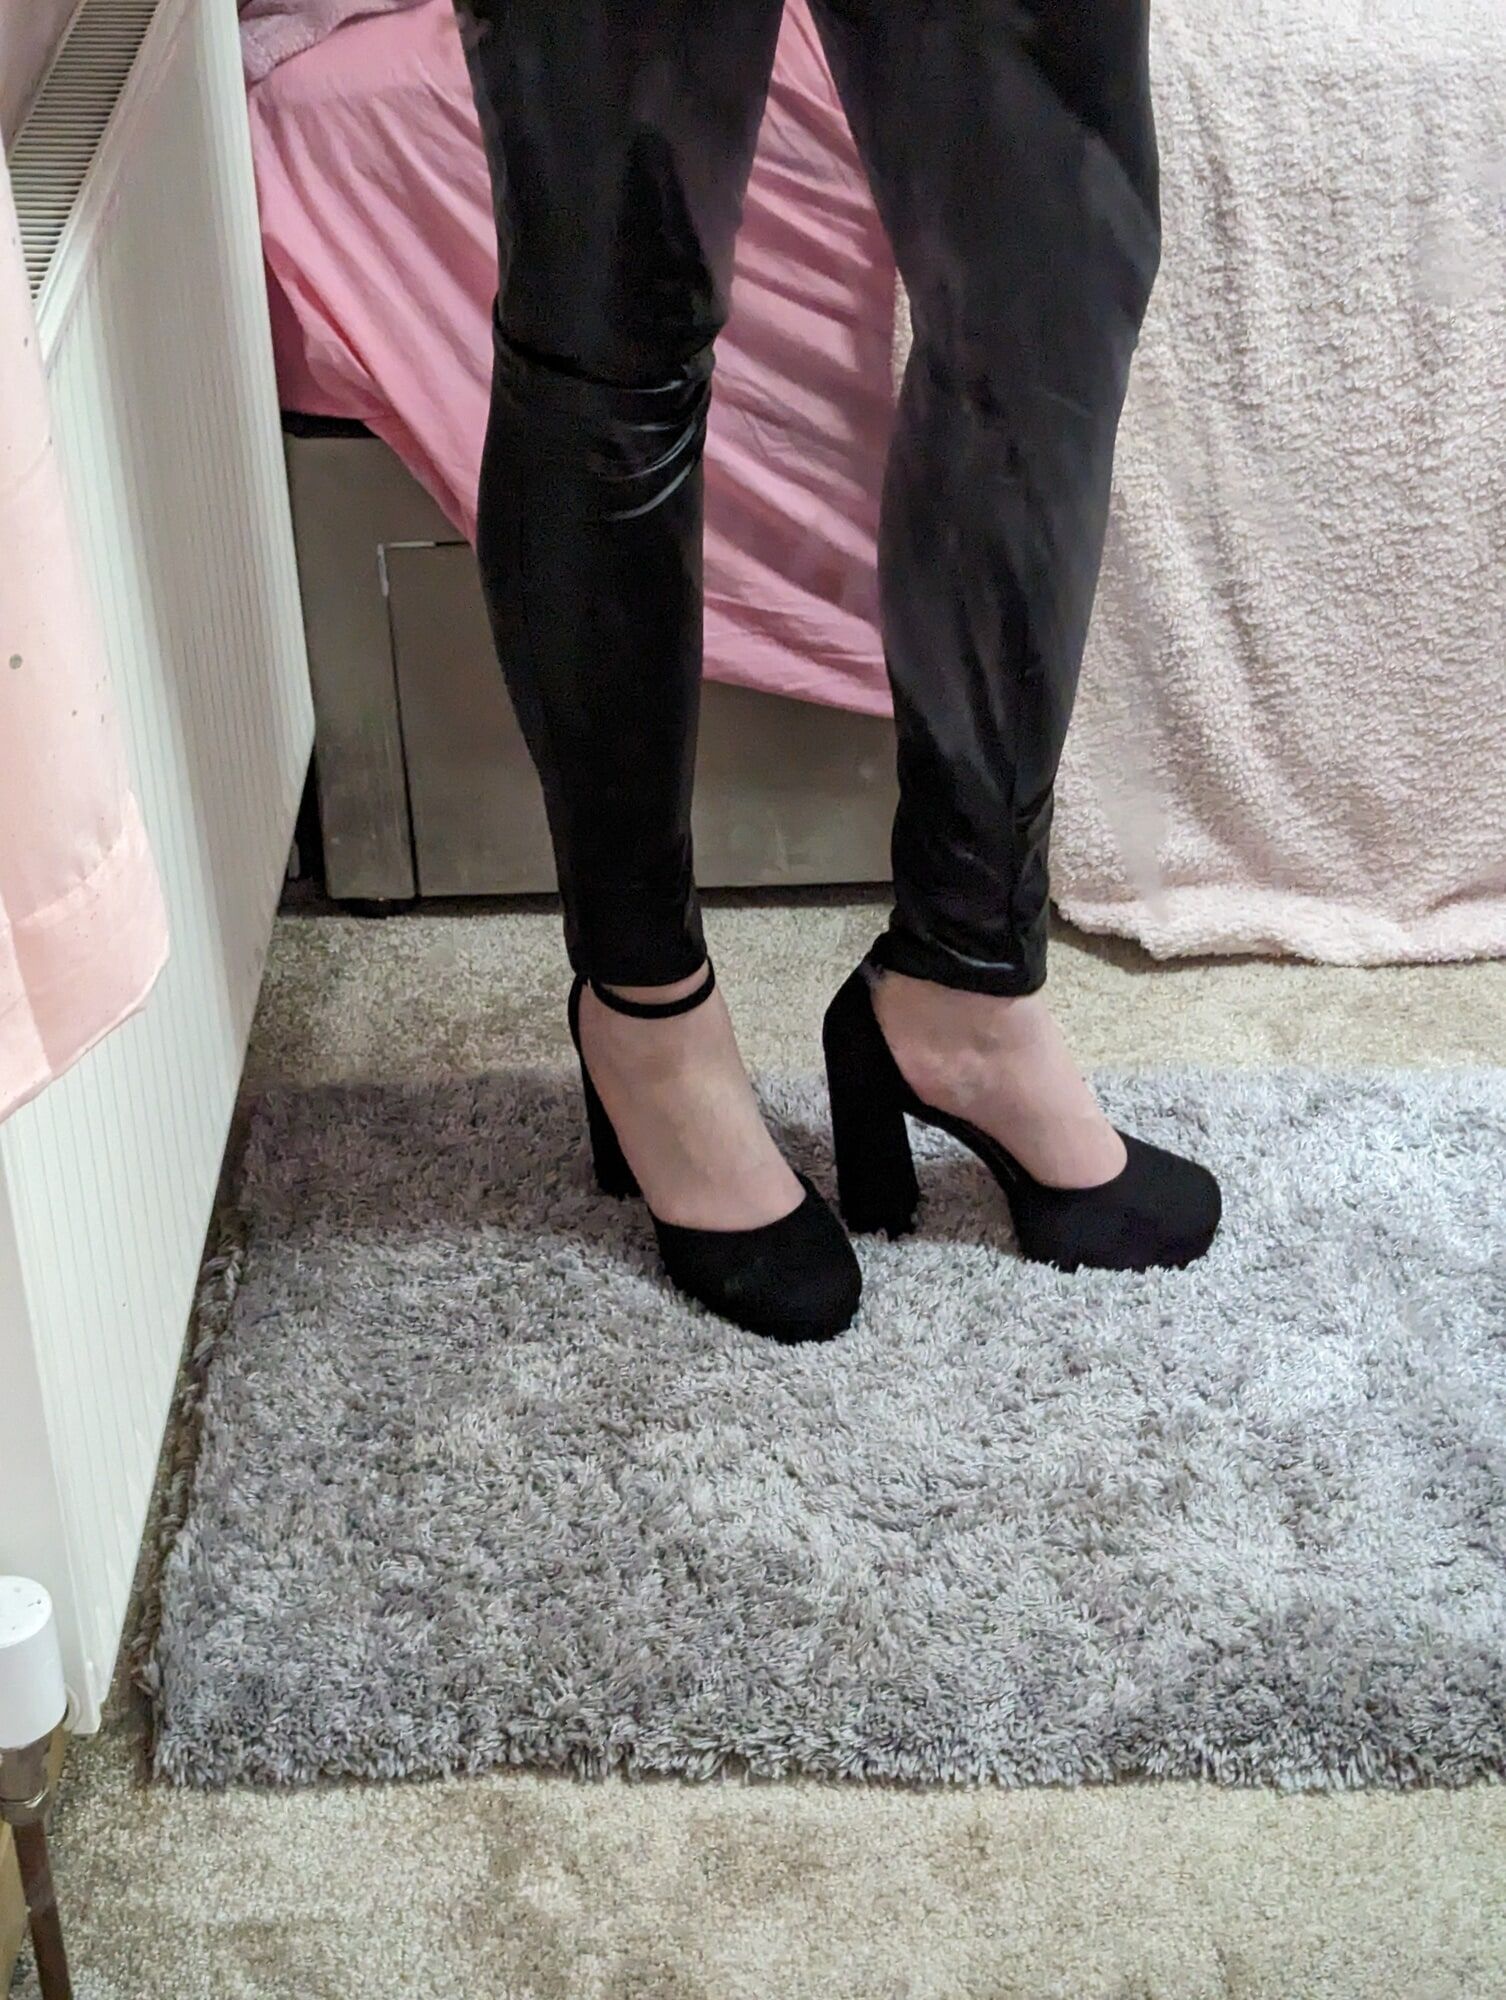 New 5 inch heels and tight shiny leggings